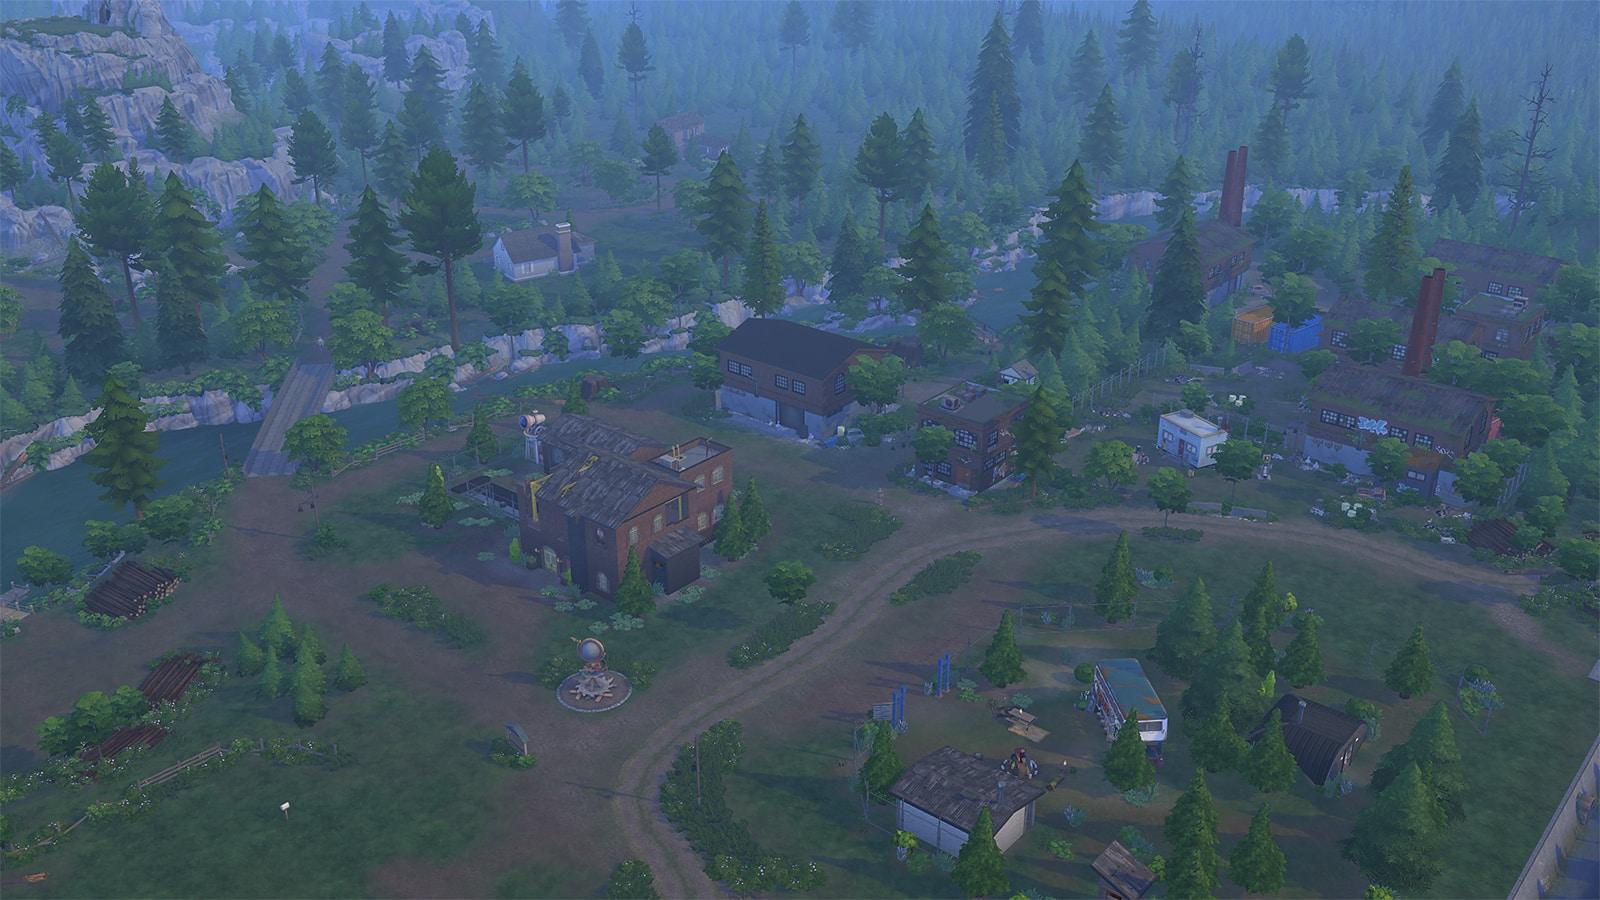 An image of Moonwood Mill in The Sims 4 Werewolves